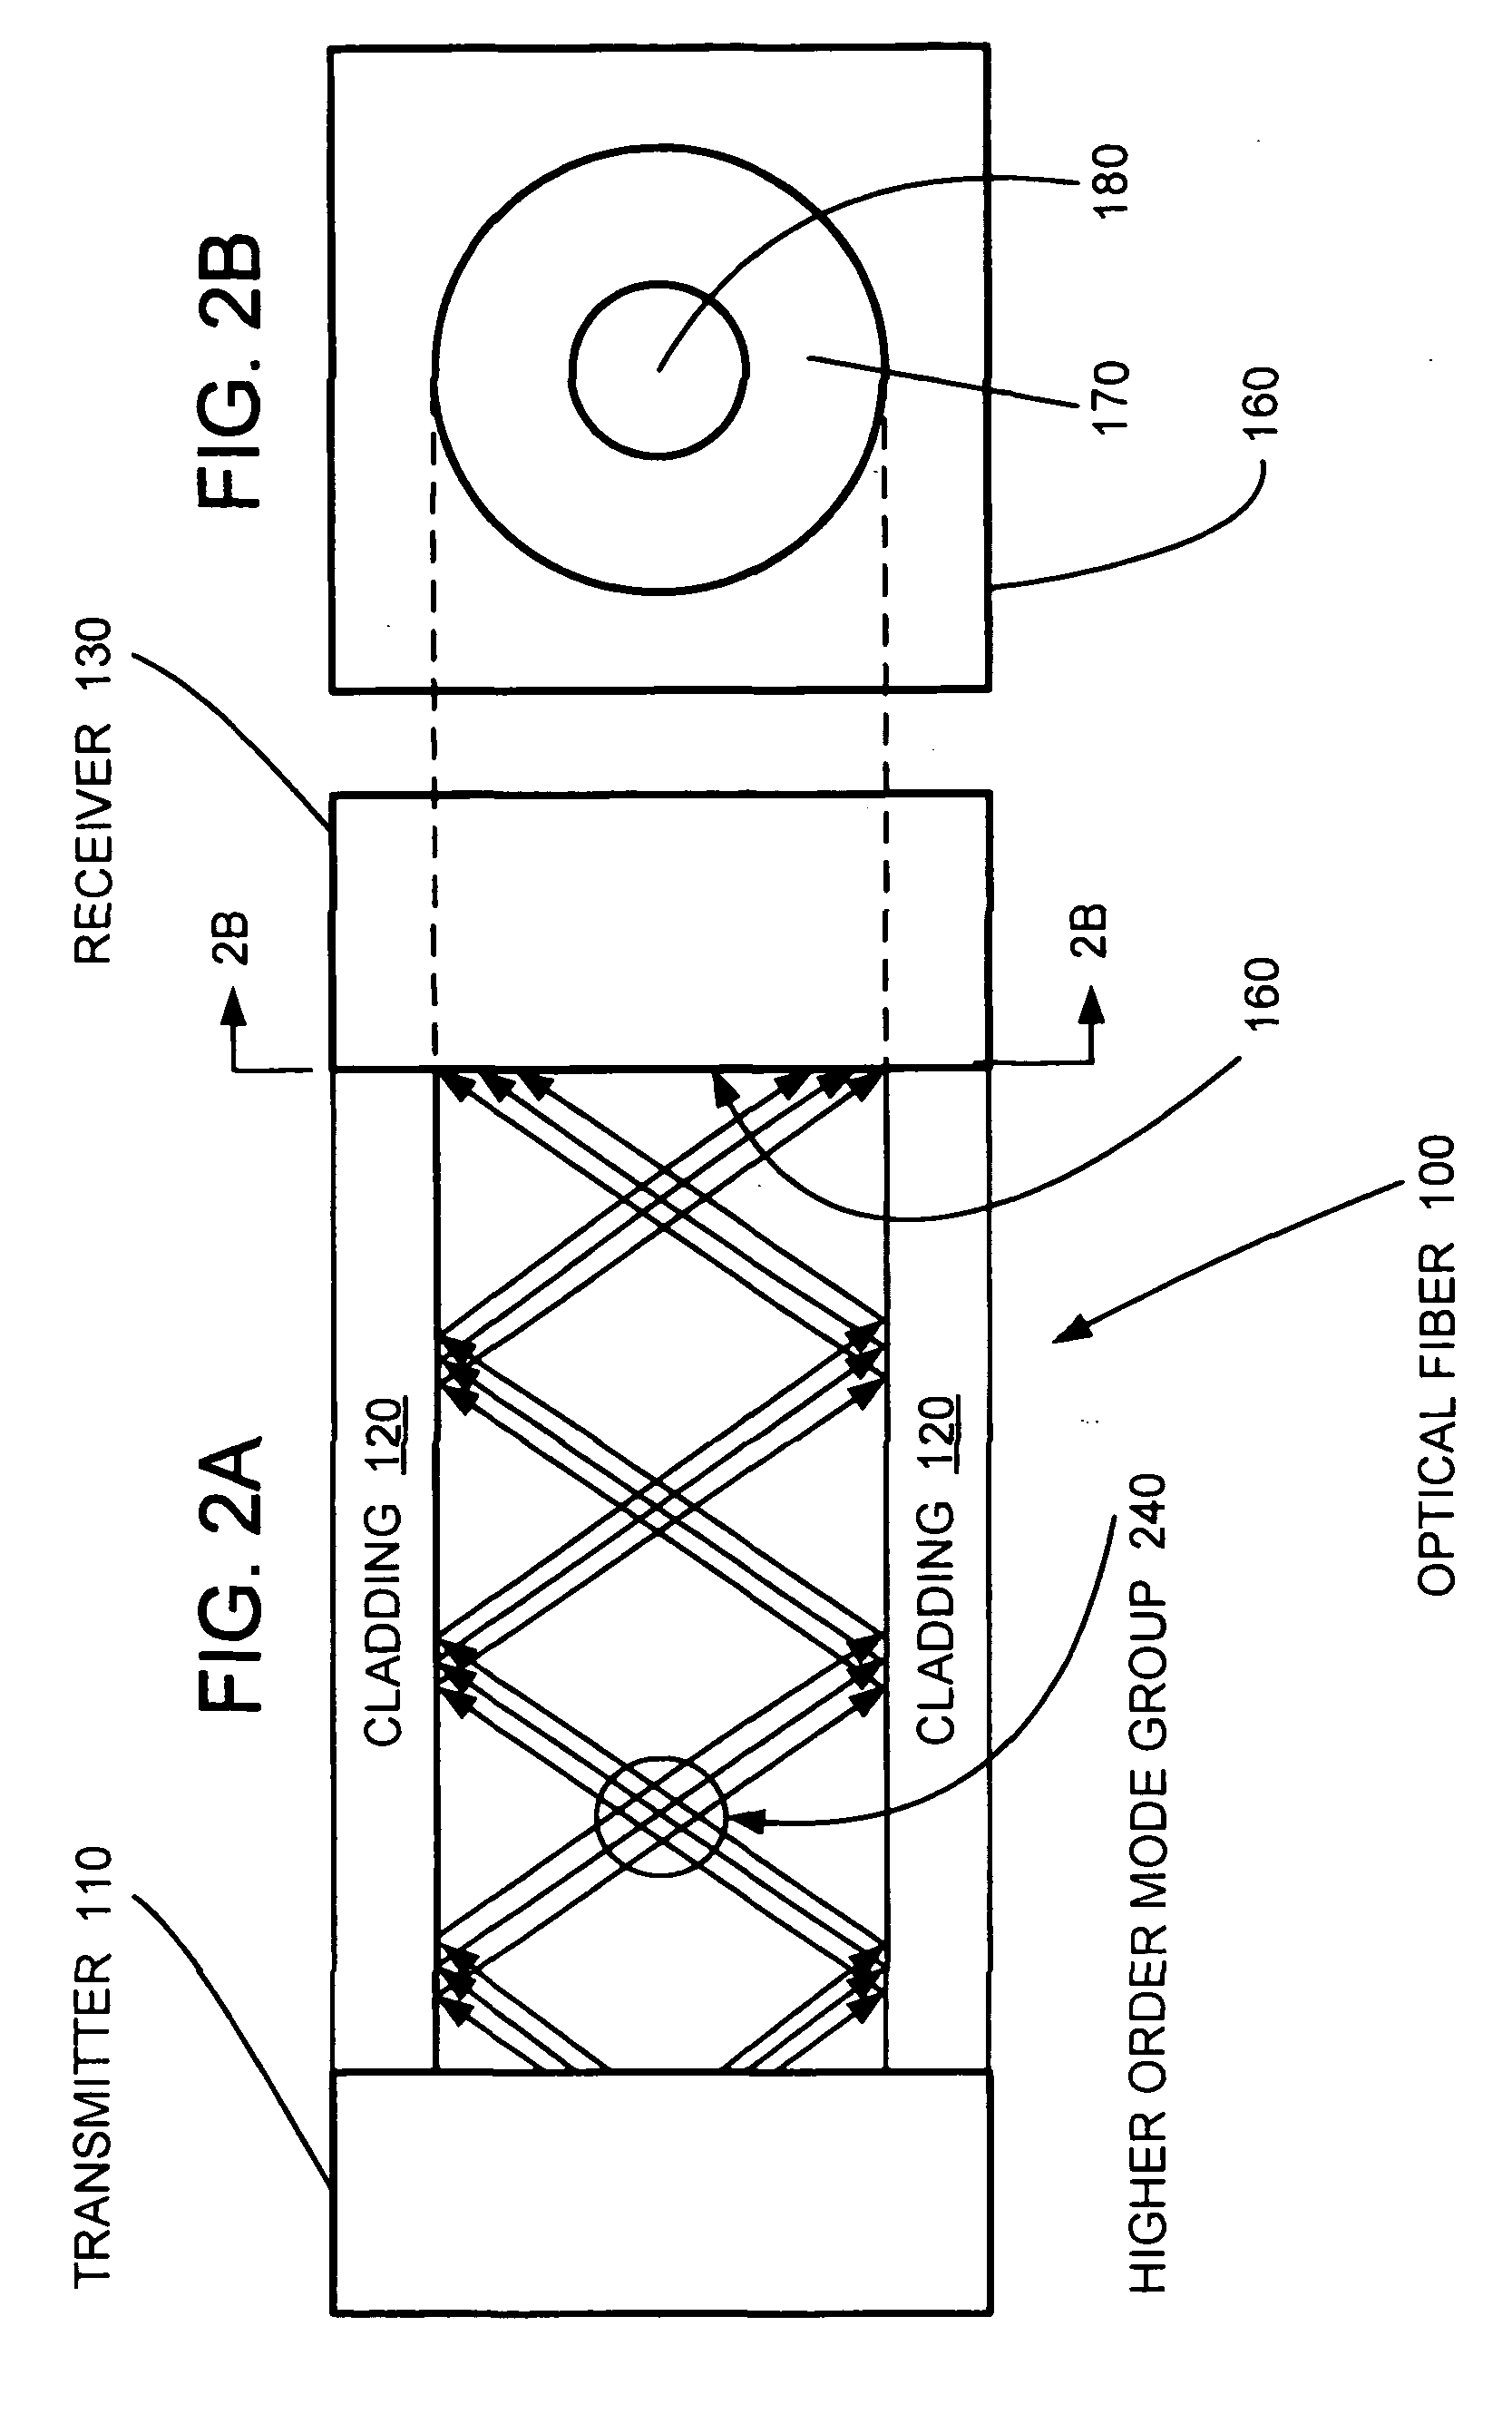 Photodiode with fiber mode dispersion compensation